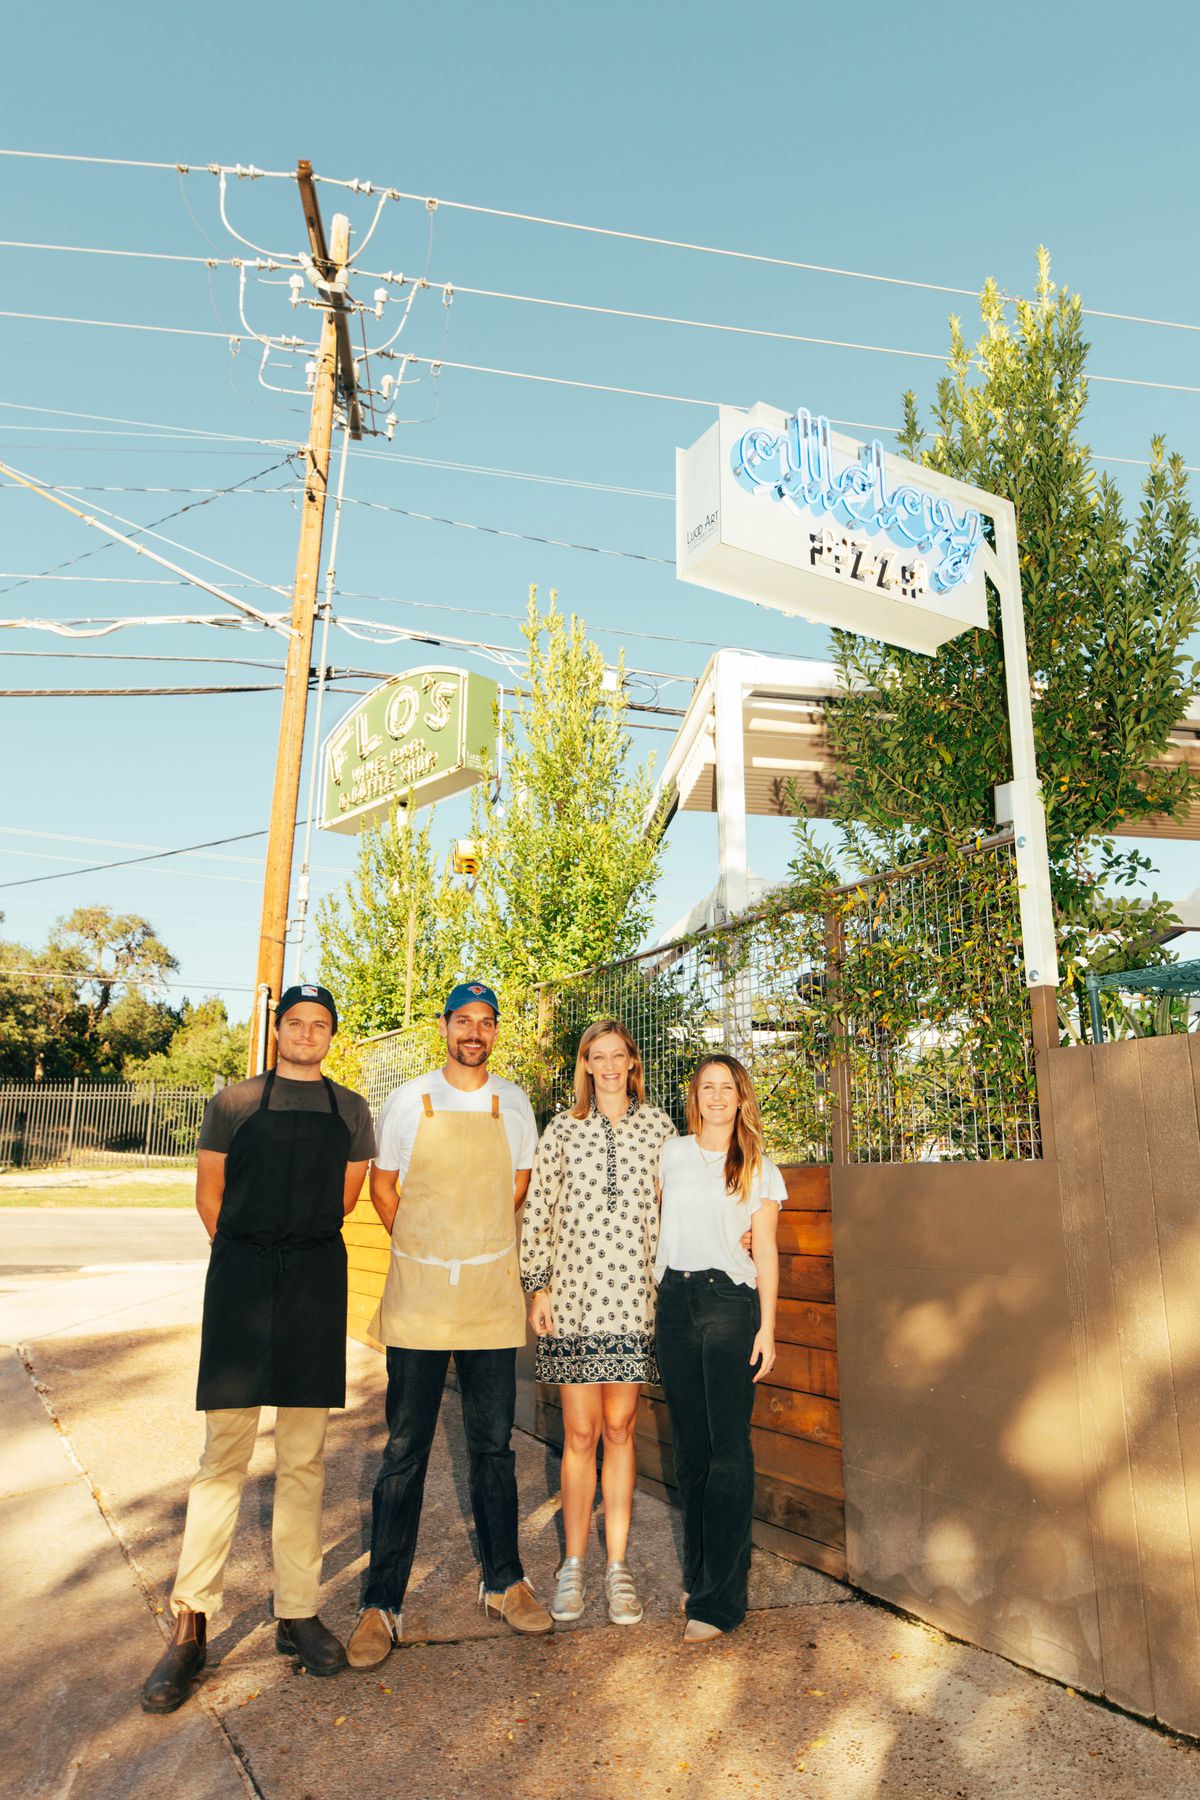 Four people posing underneath a sign outside reading Allday Pizza.